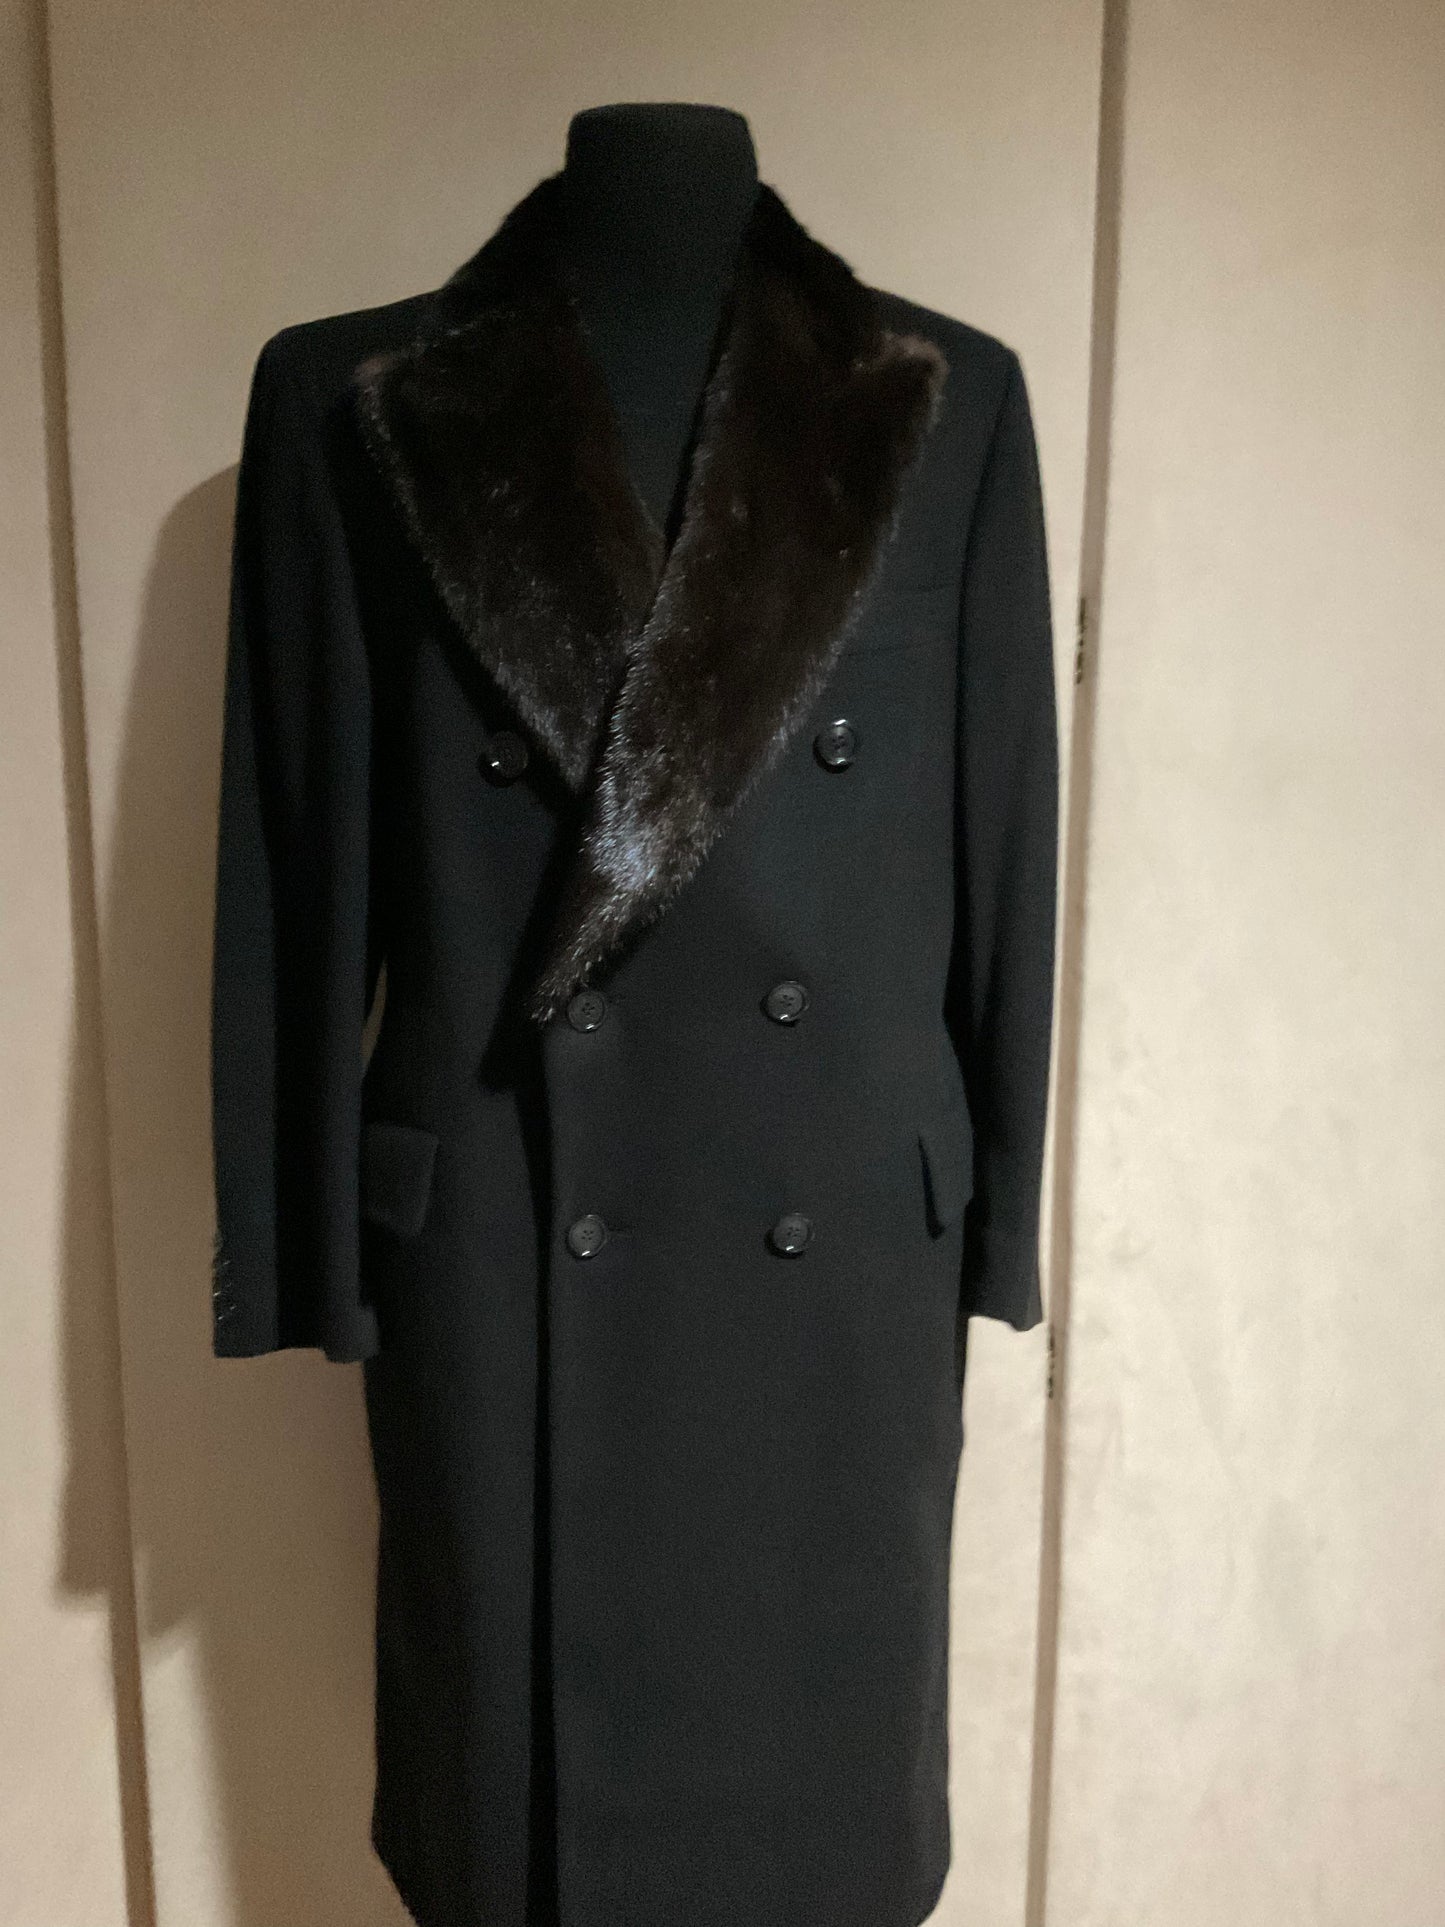 R P OVERCOAT / BLACK / PURE CASHMERE & MINK / NEW / 40 - 42 / MADE IN CANADA